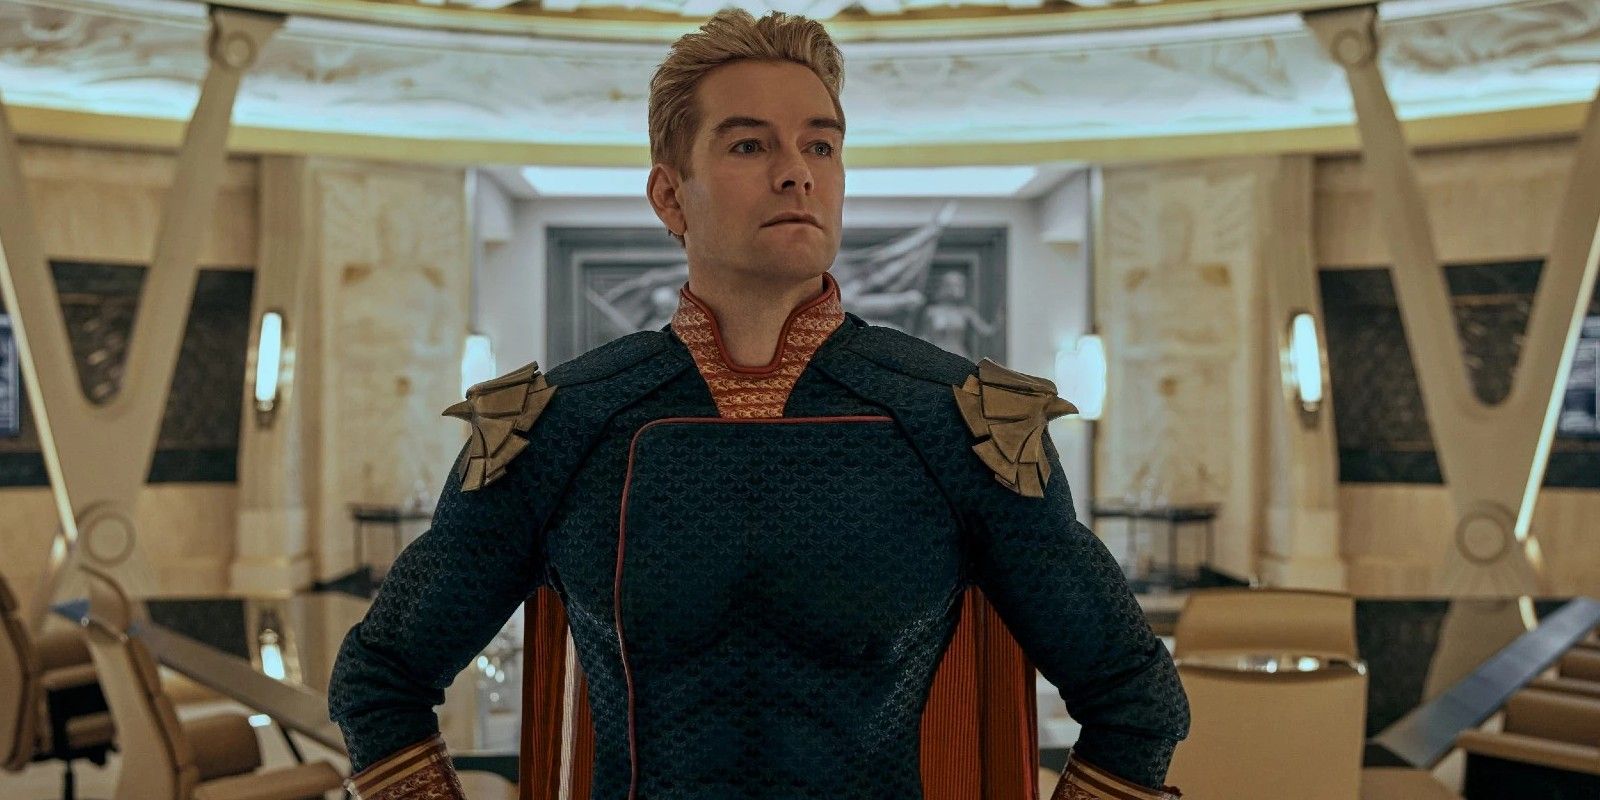 Homelander, played by Antony Starr, in Amazon Prime's The Boys